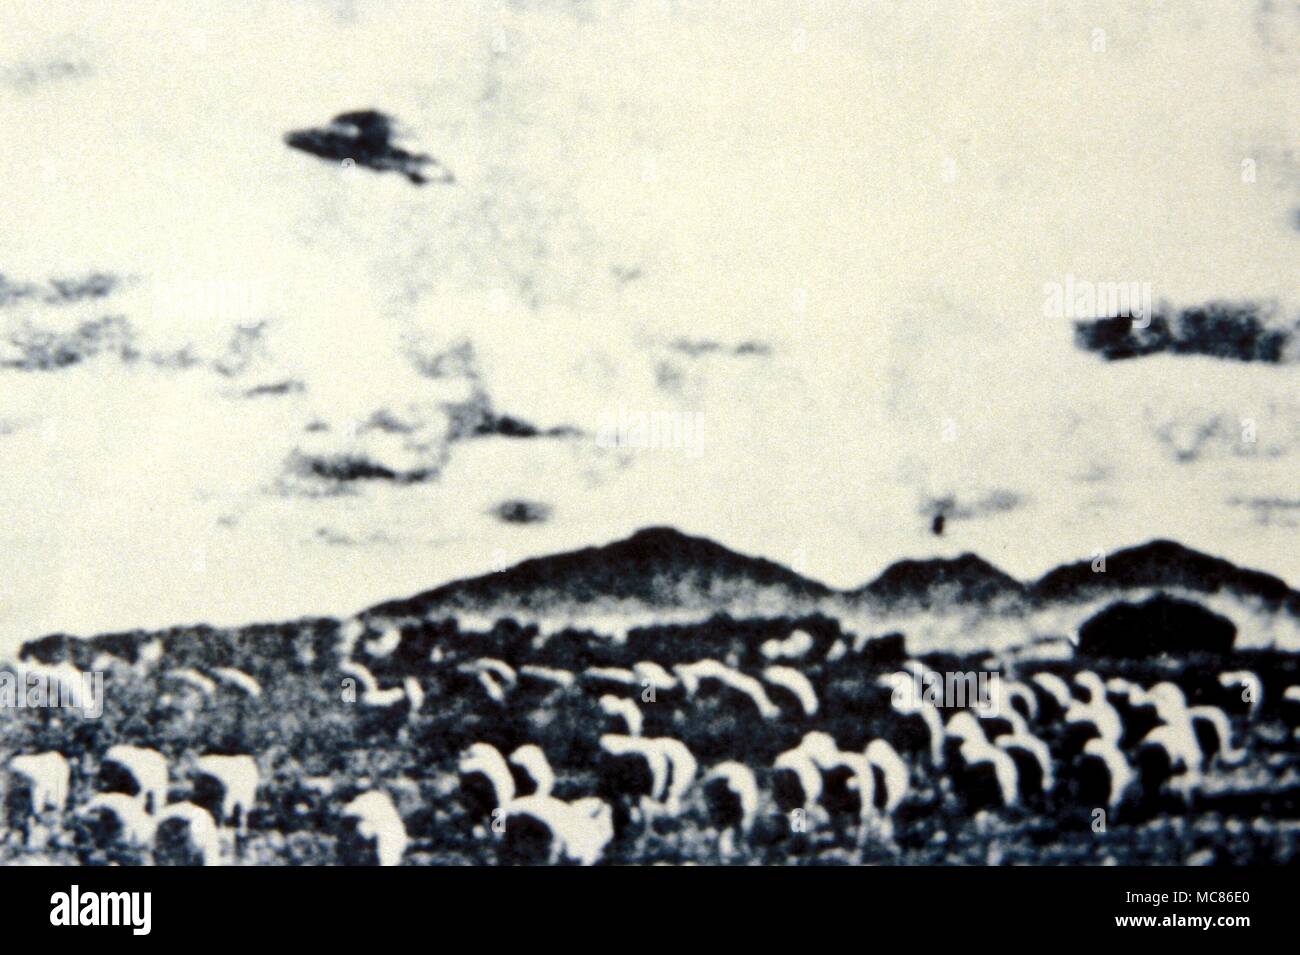 UFO - unidentified flying object photograph by W C Hall in Queensland, Australia, 18 July 1954 Stock Photo